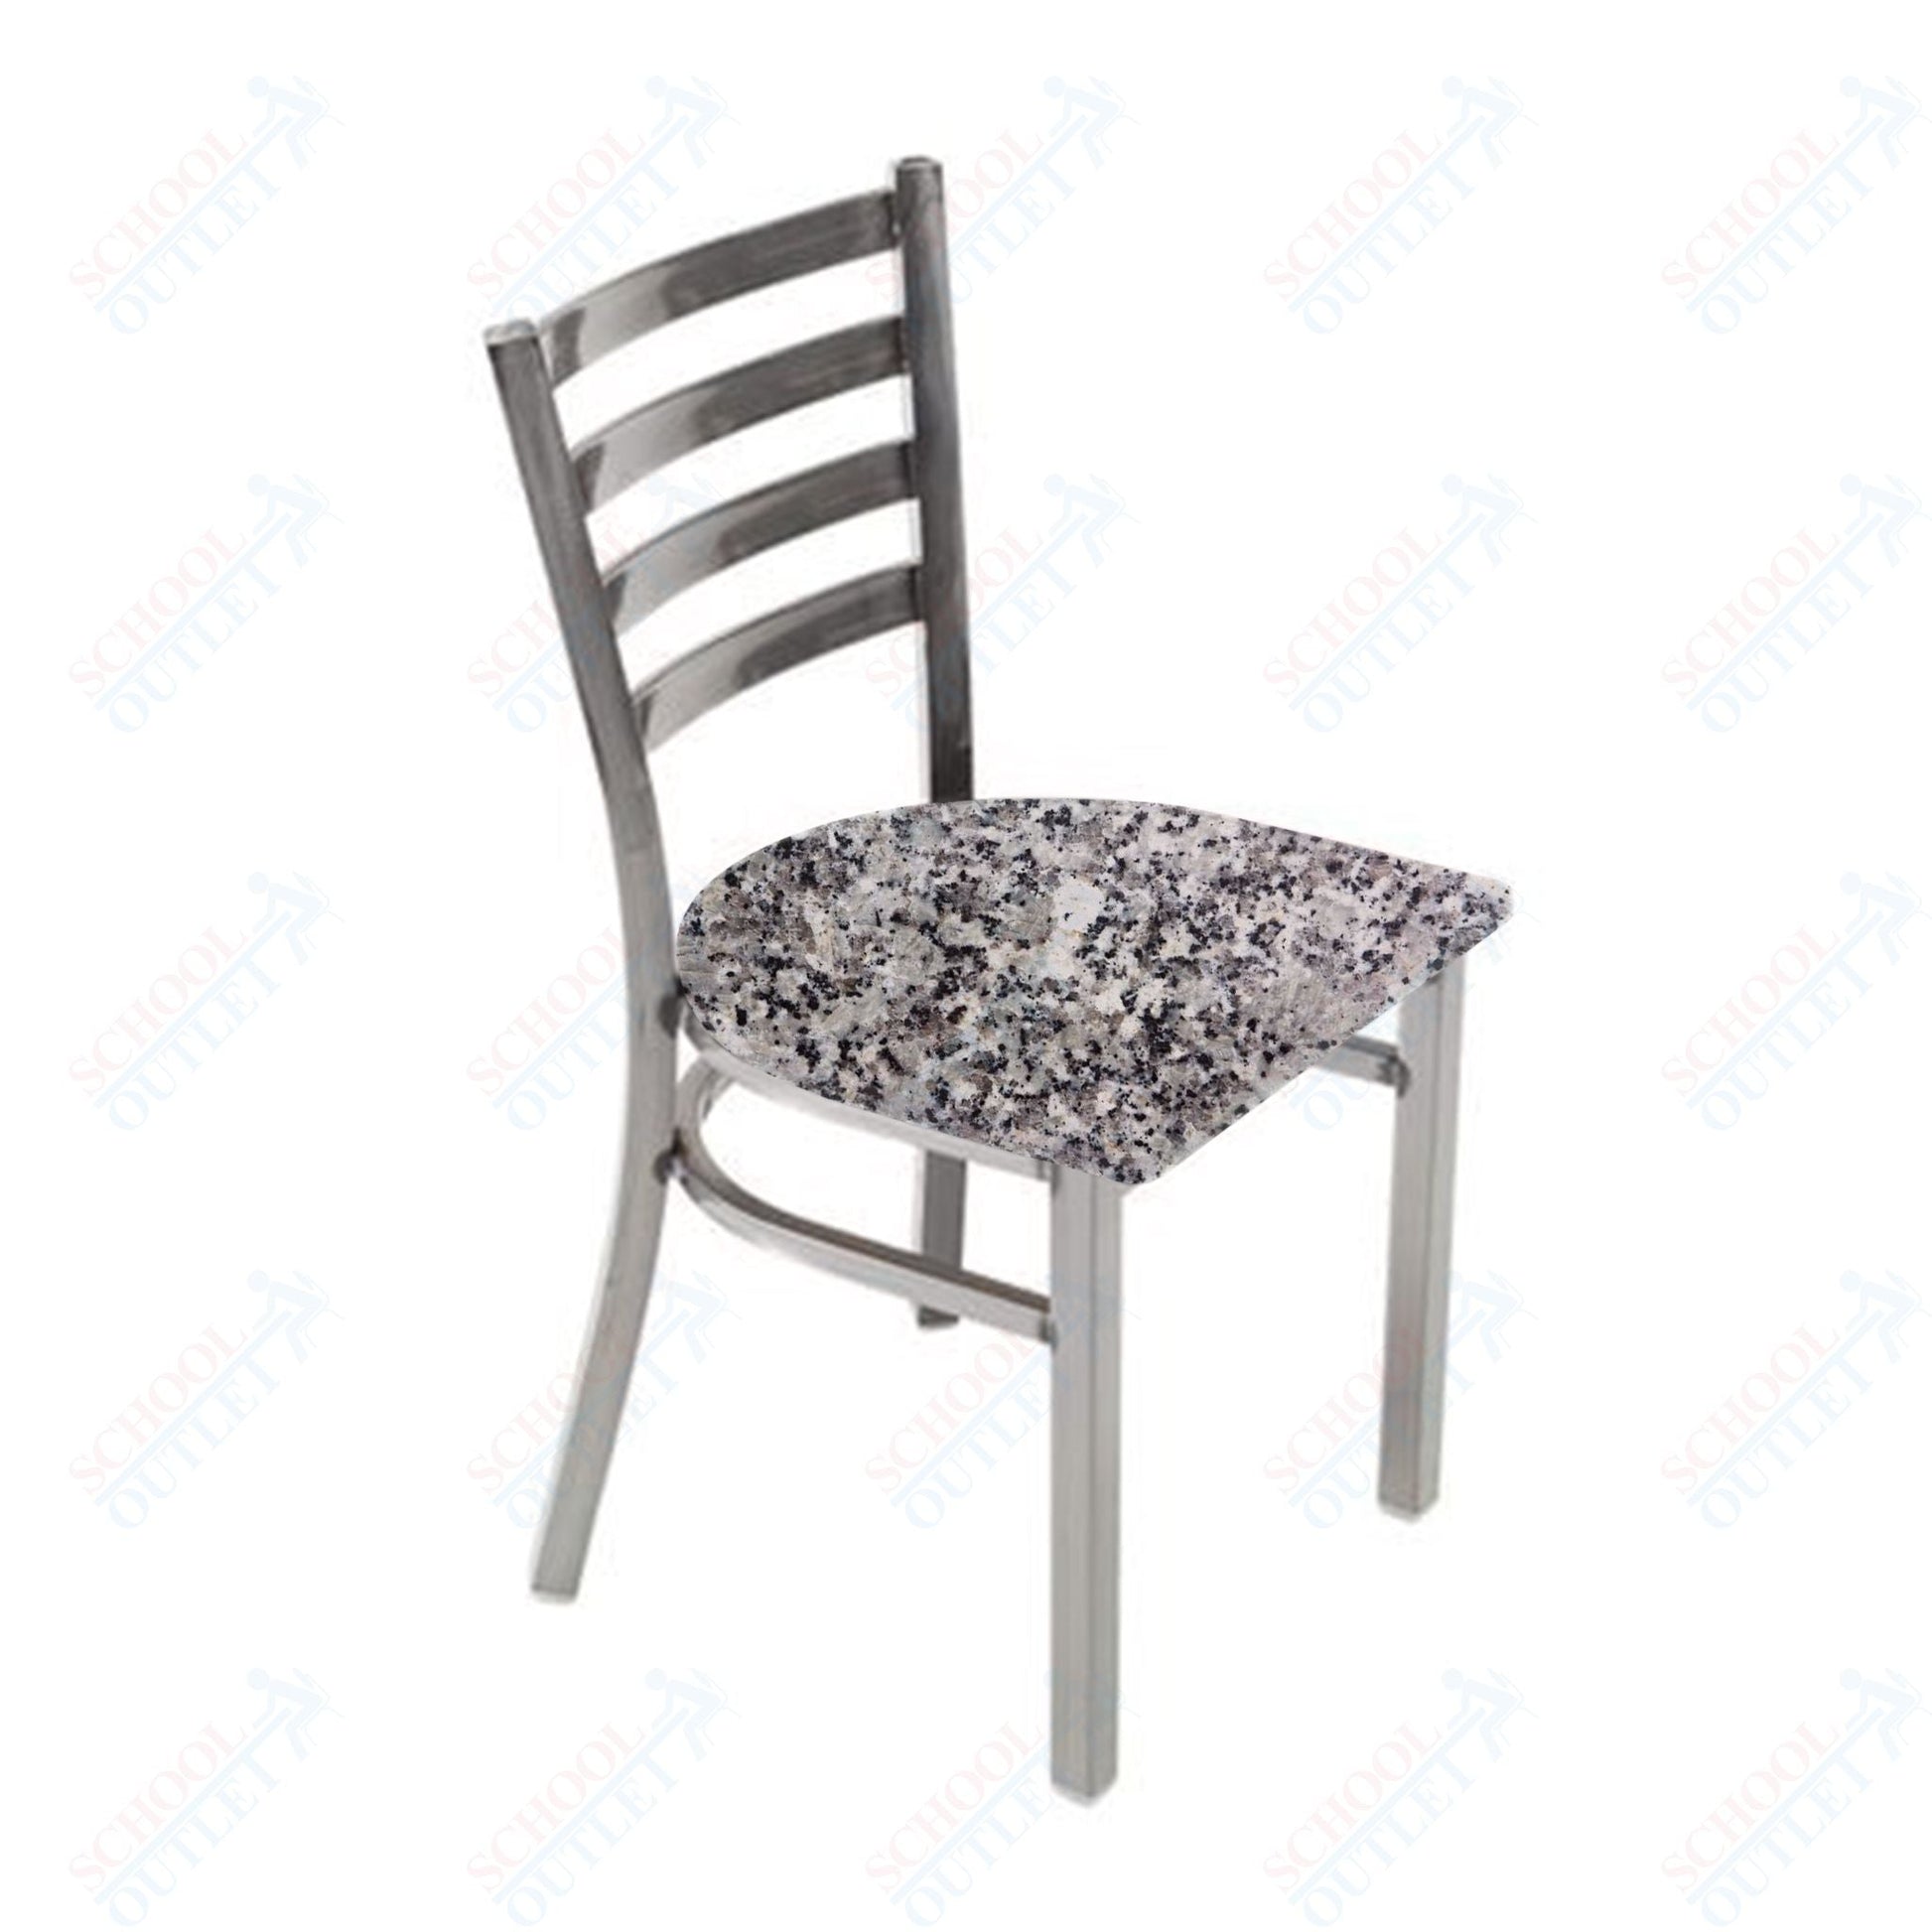 AmTab Cafe Chair - 16.5"W x 17"L x 32.25"H - Seat Height 17.25"H (AMT - CAFECHAIR - 3) - SchoolOutlet